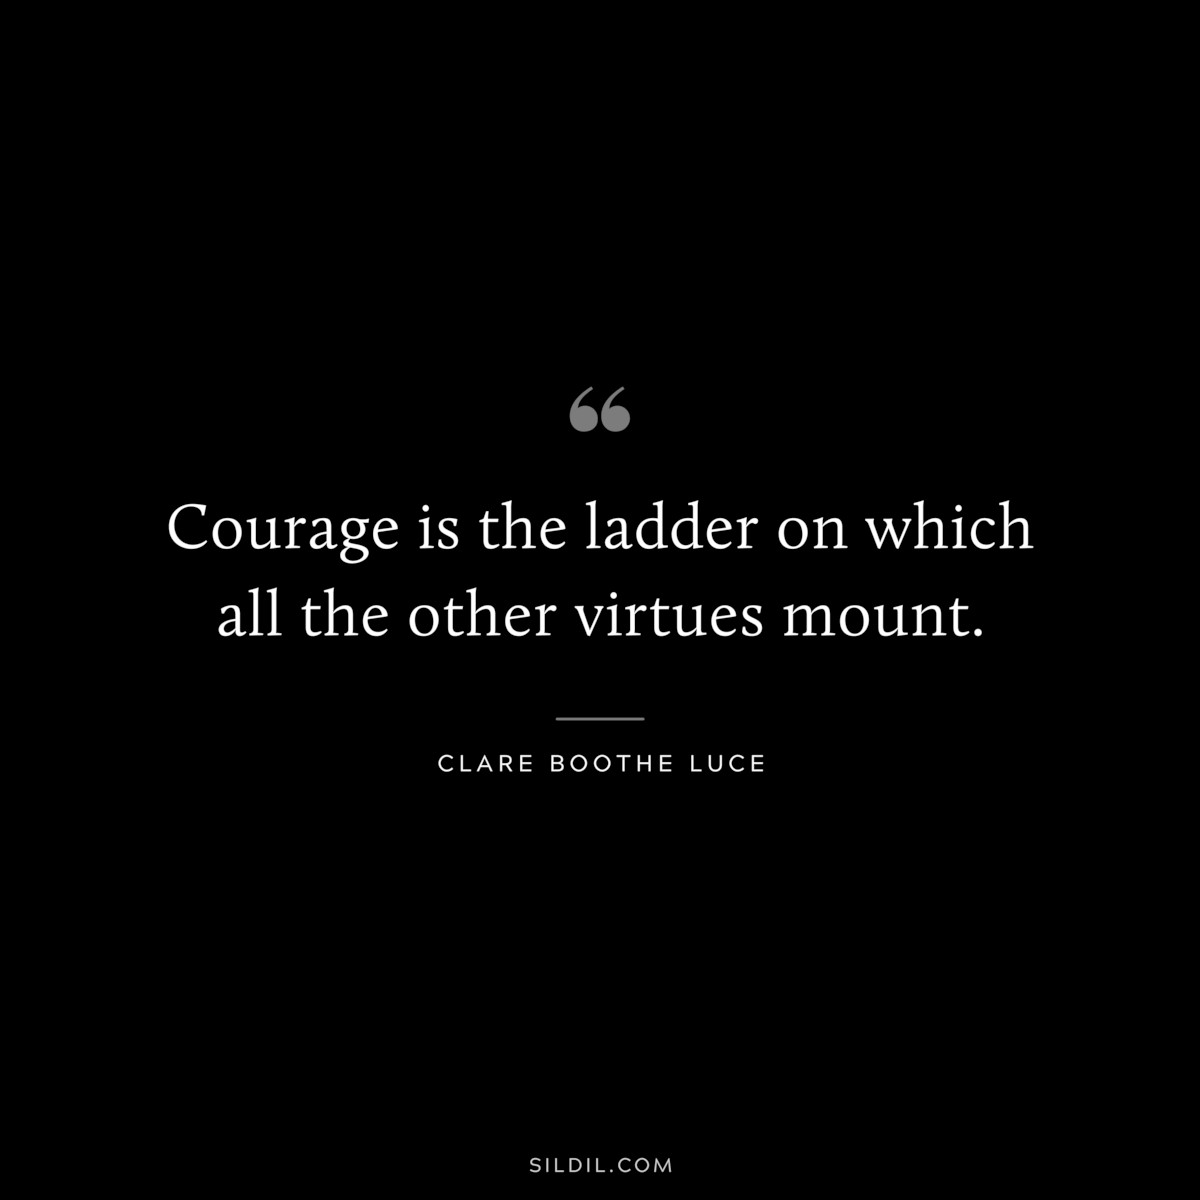 Courage is the ladder on which all the other virtues mount. ― Clare Boothe Luce